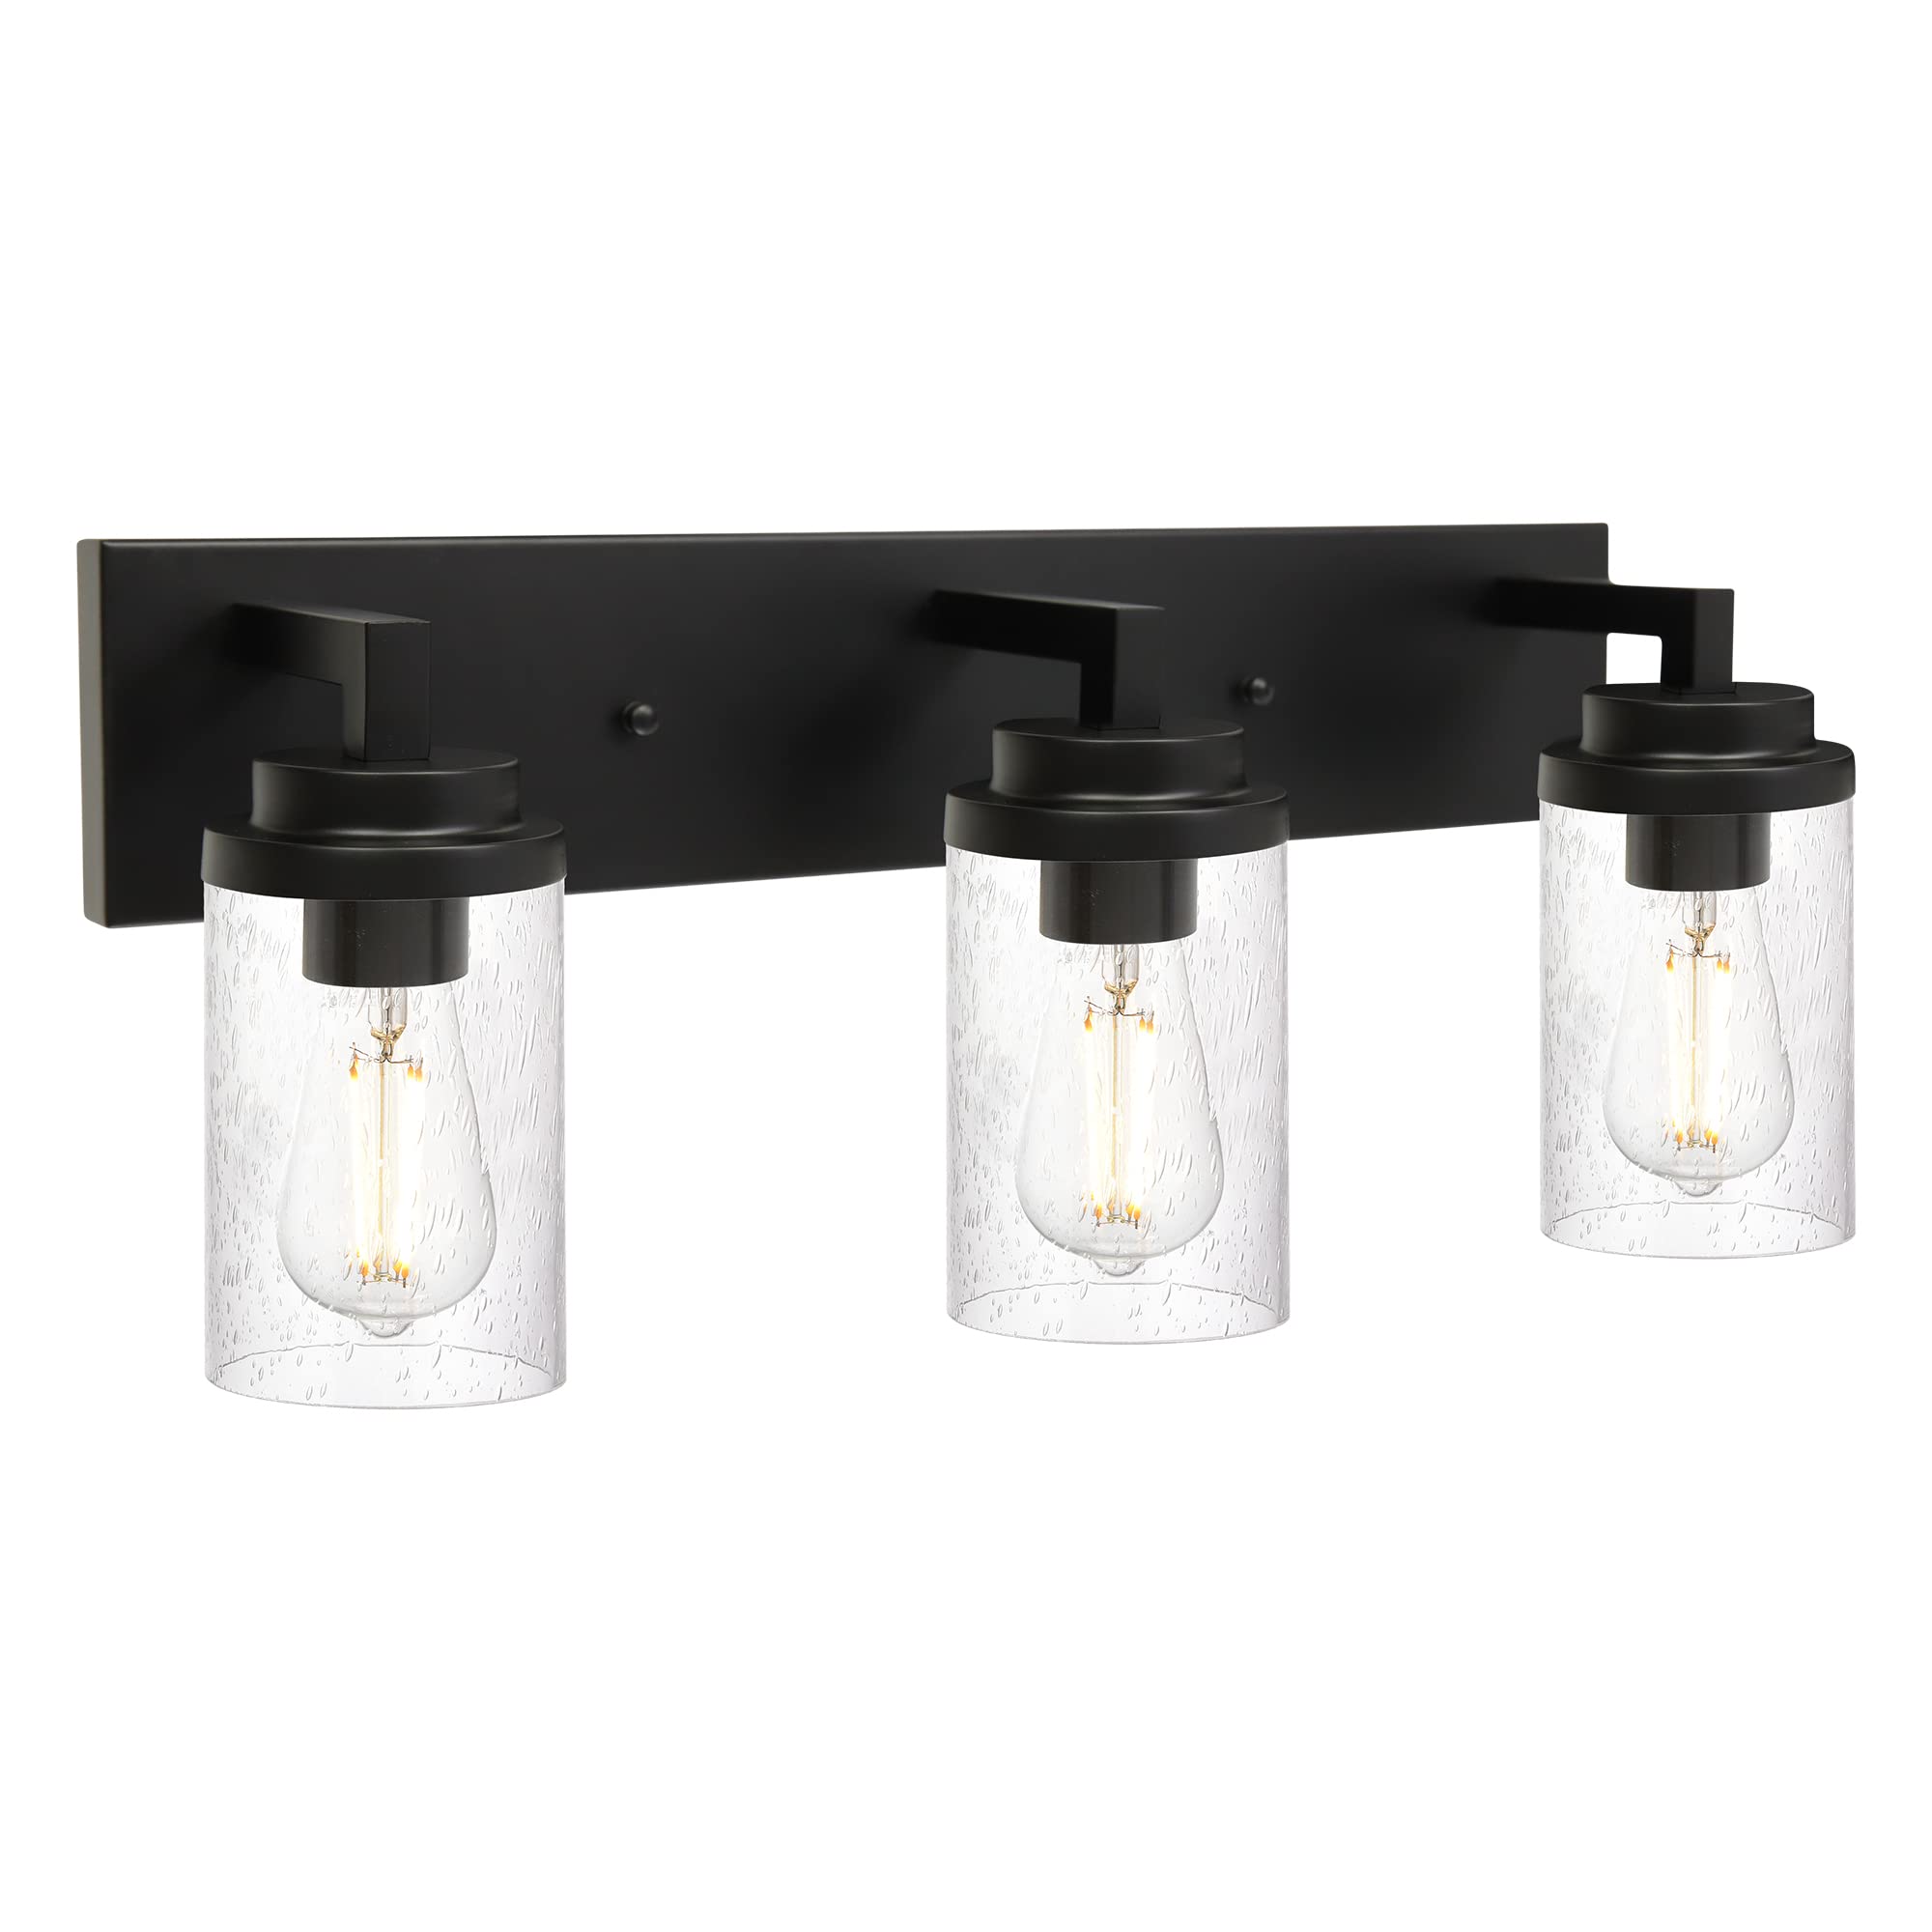 MELUCEE Bathroom Light Fixtures, 3 Light Matte Black Vanity Light Modern Bath Wall Mounted Lights with Seeded Glass Shade for Kitchen Bedroom Hallway Stairs, 23.6 Inches Length